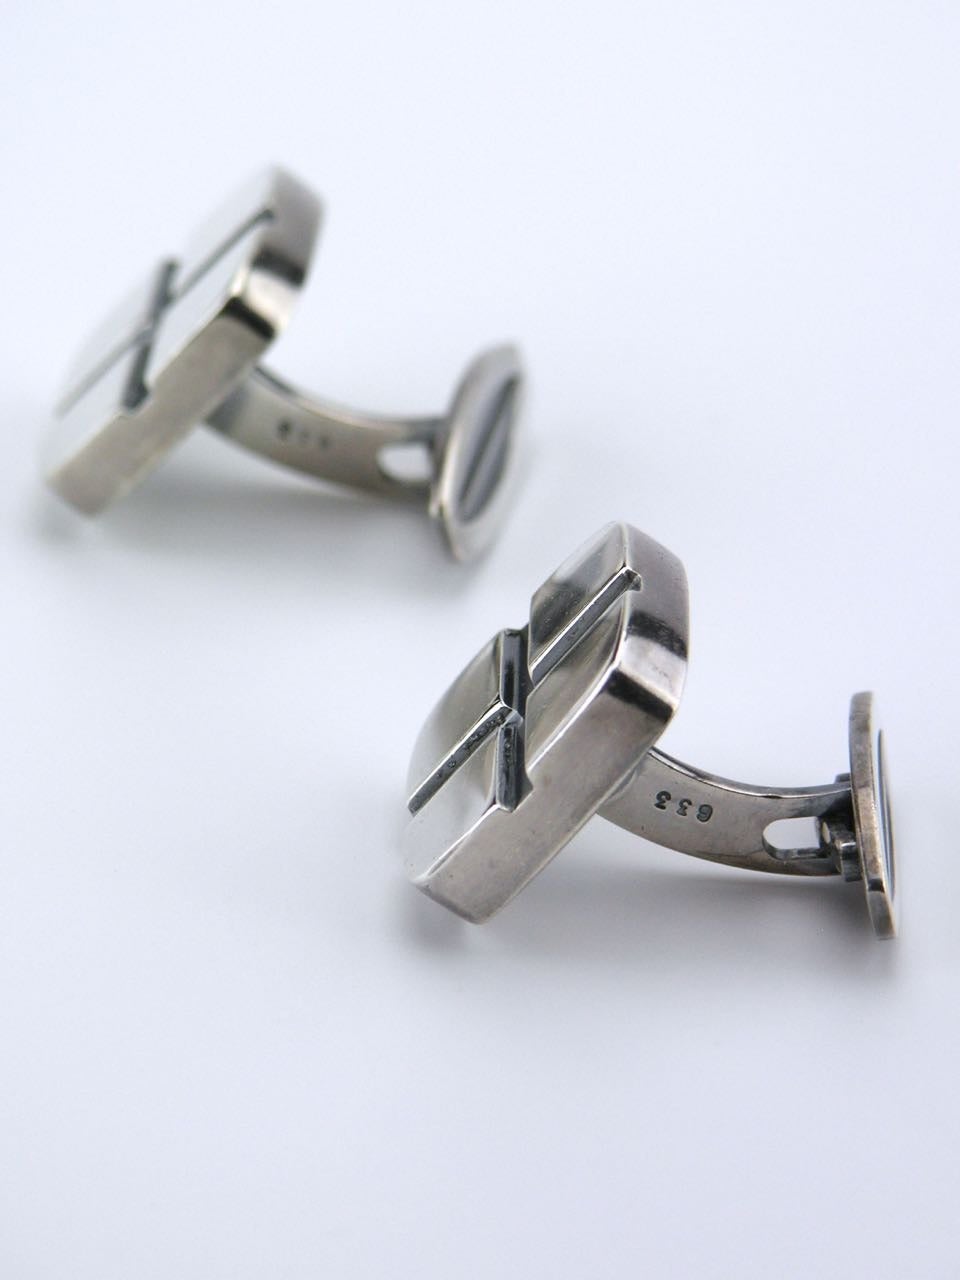 Rounded square tablet cufflinks with an insicised oxidised cross quartering the face. 

Marked for Hans Hansen of Kolding.